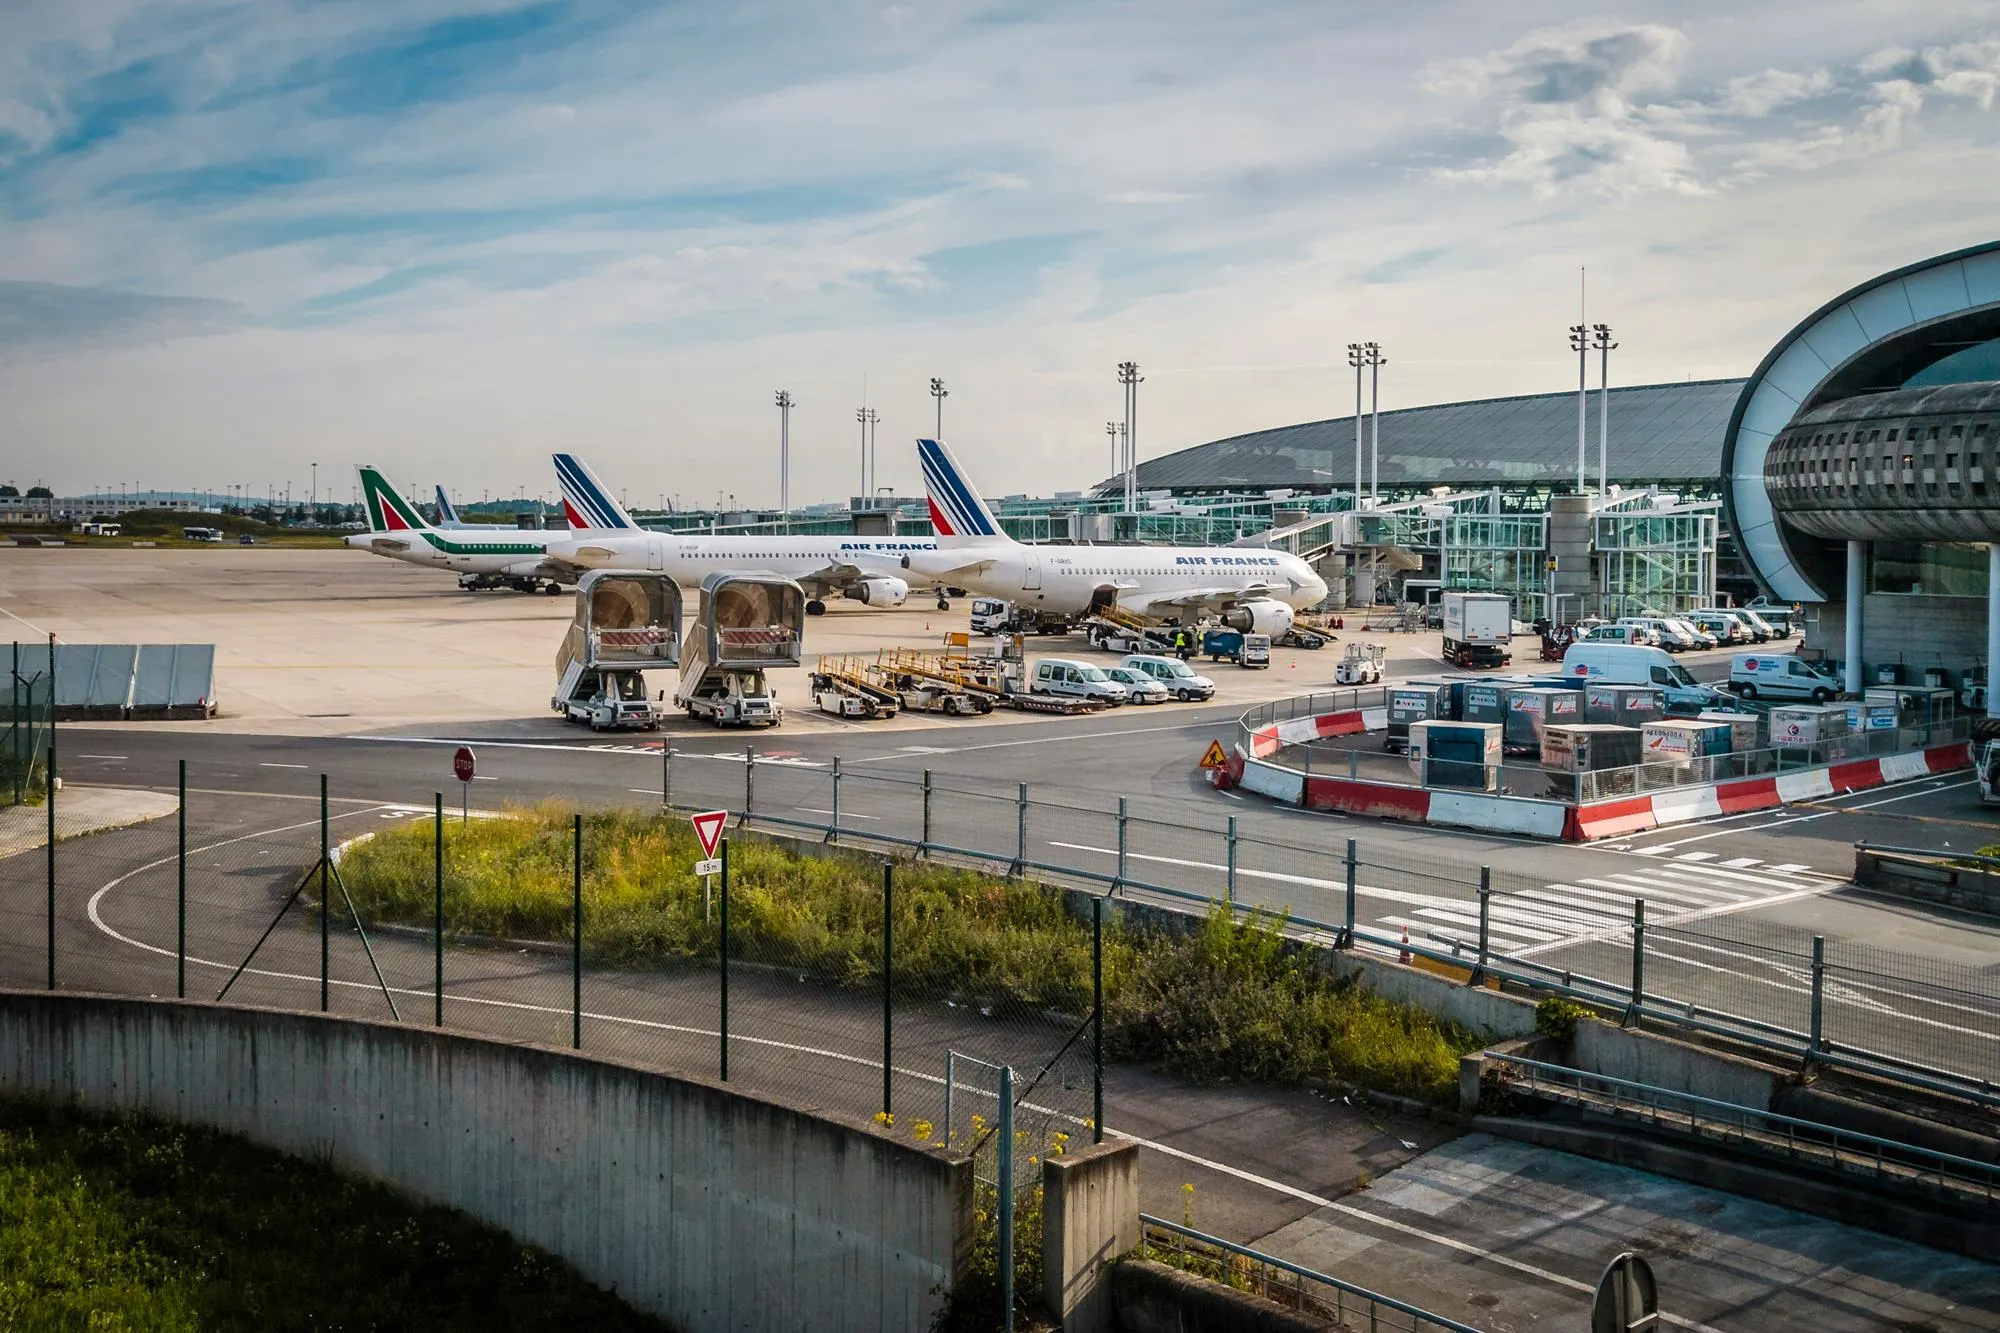 Charles de Gaulle Airport. Source: Photo by Chandra Ramsurran/Shutterstock.com